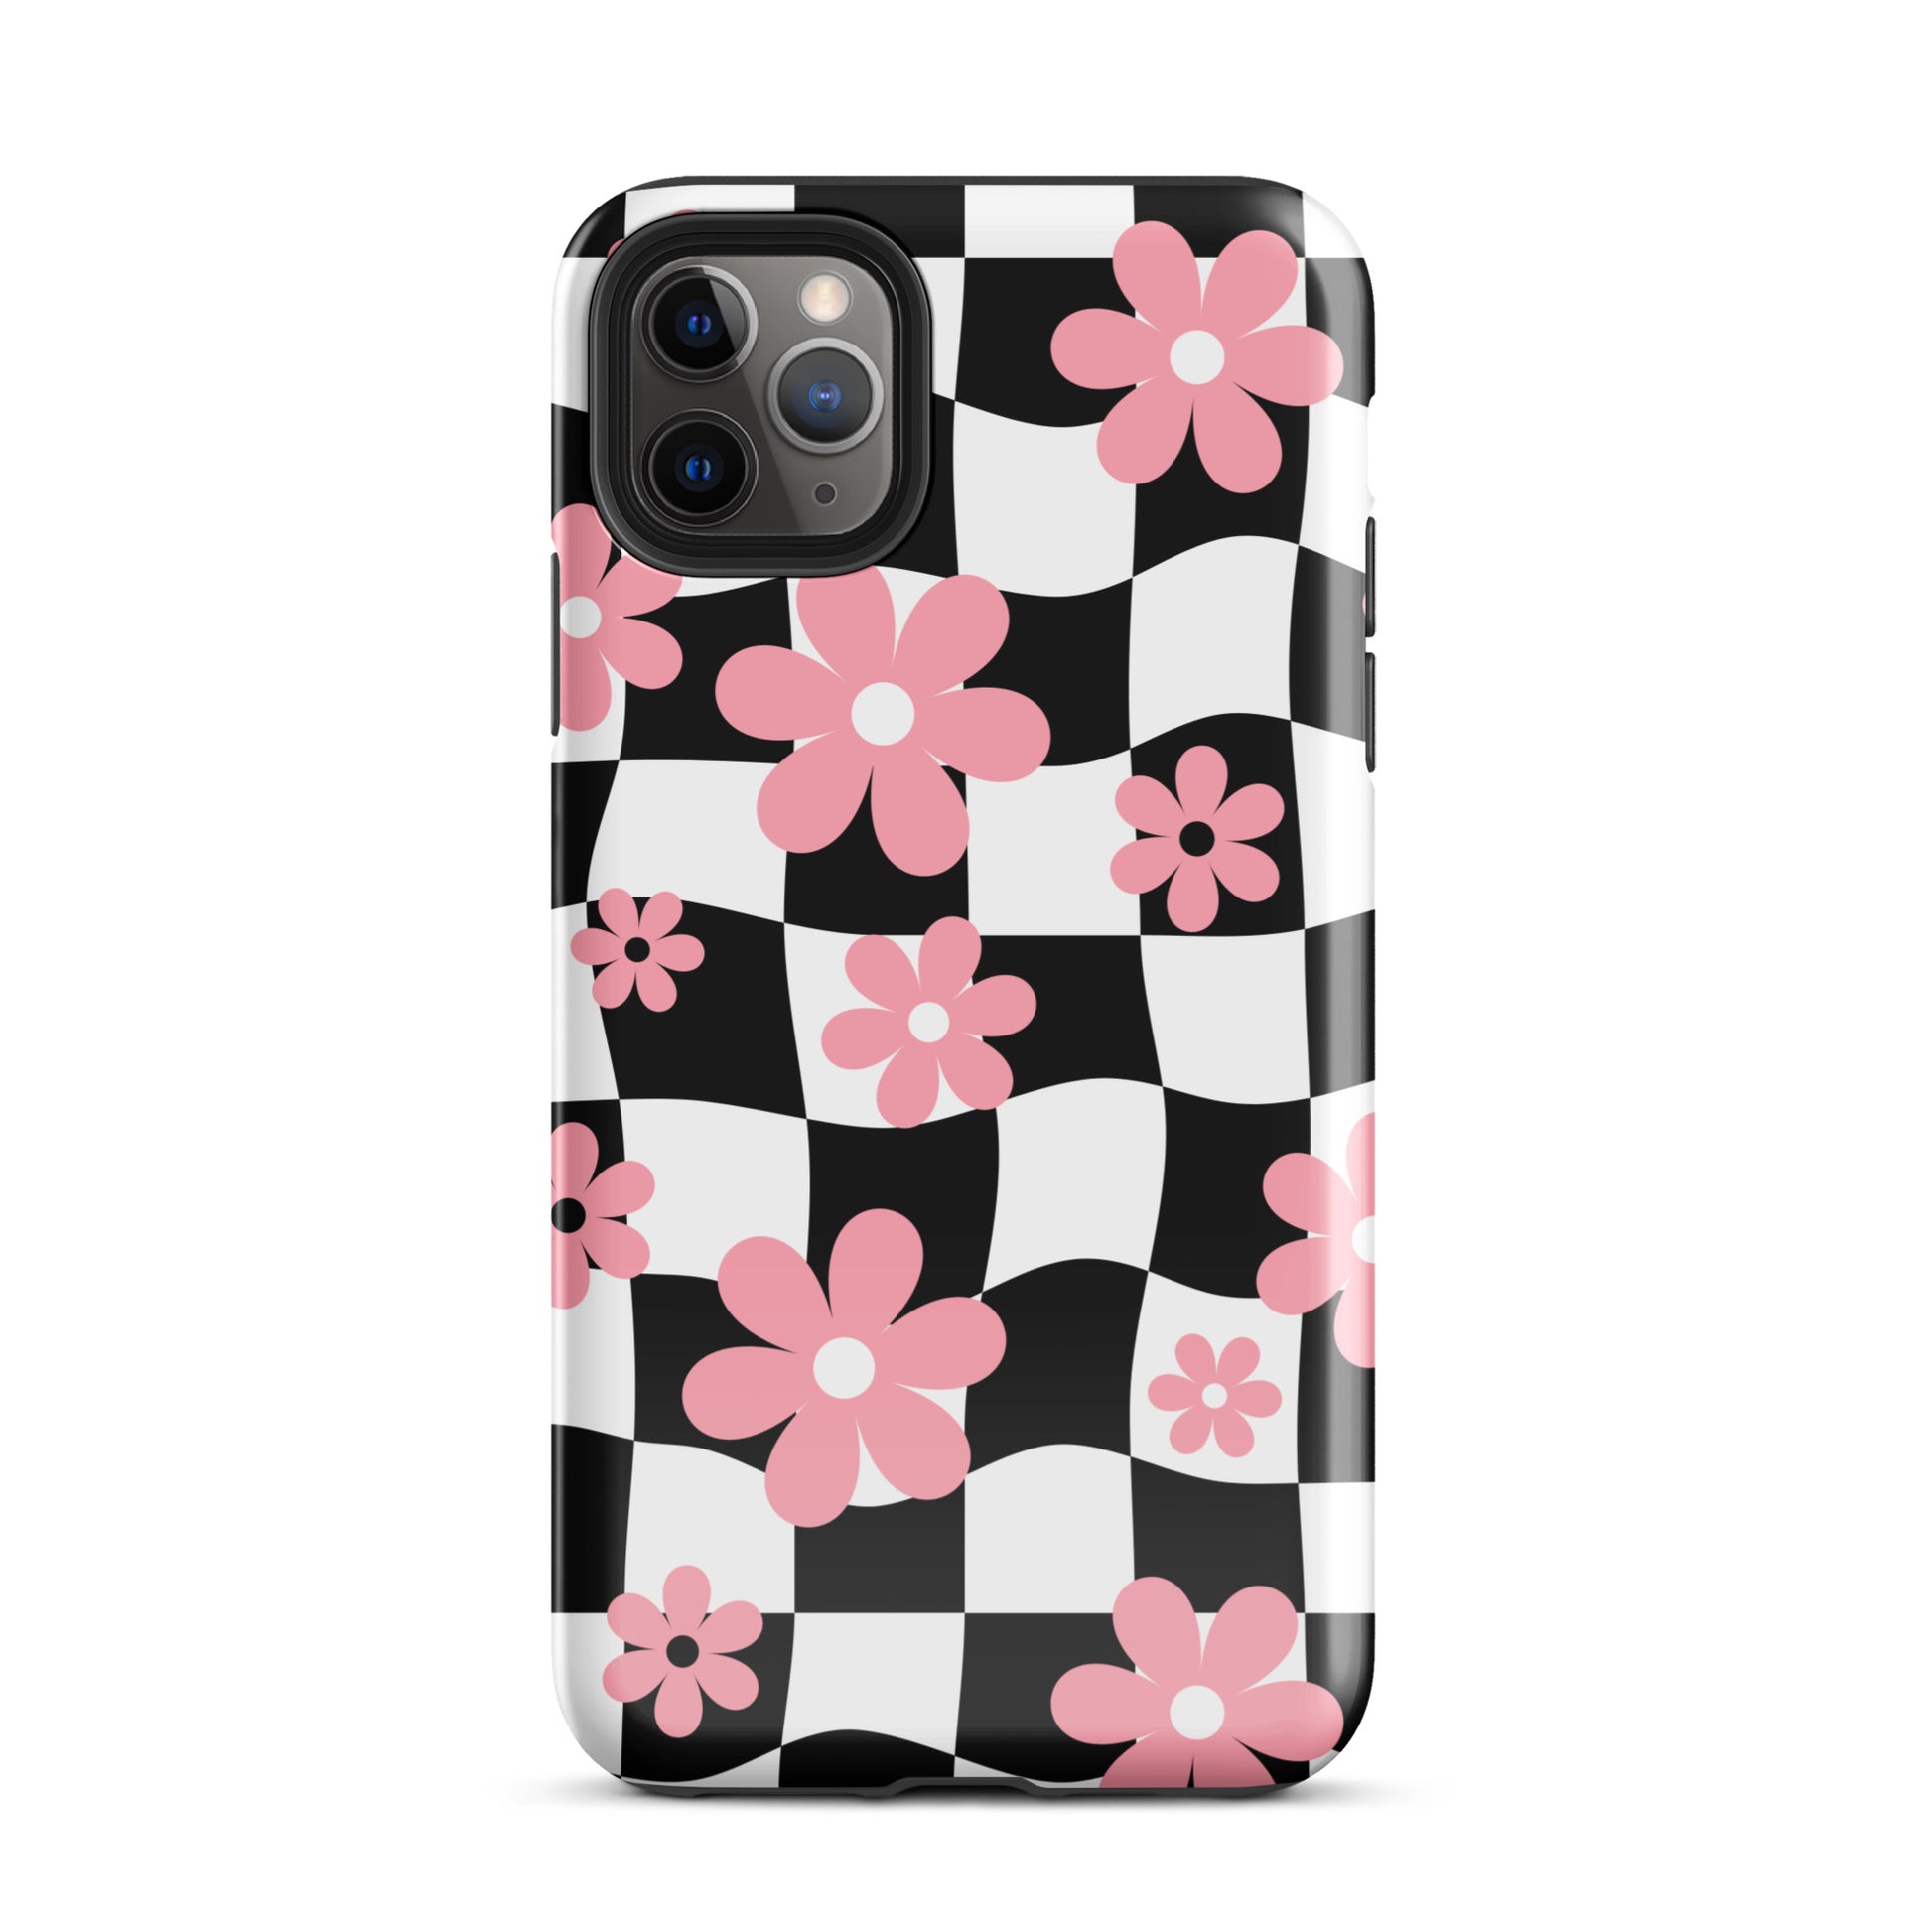 Floral Wavy Checkered iPhone Case iPhone 11 Pro Max Glossy